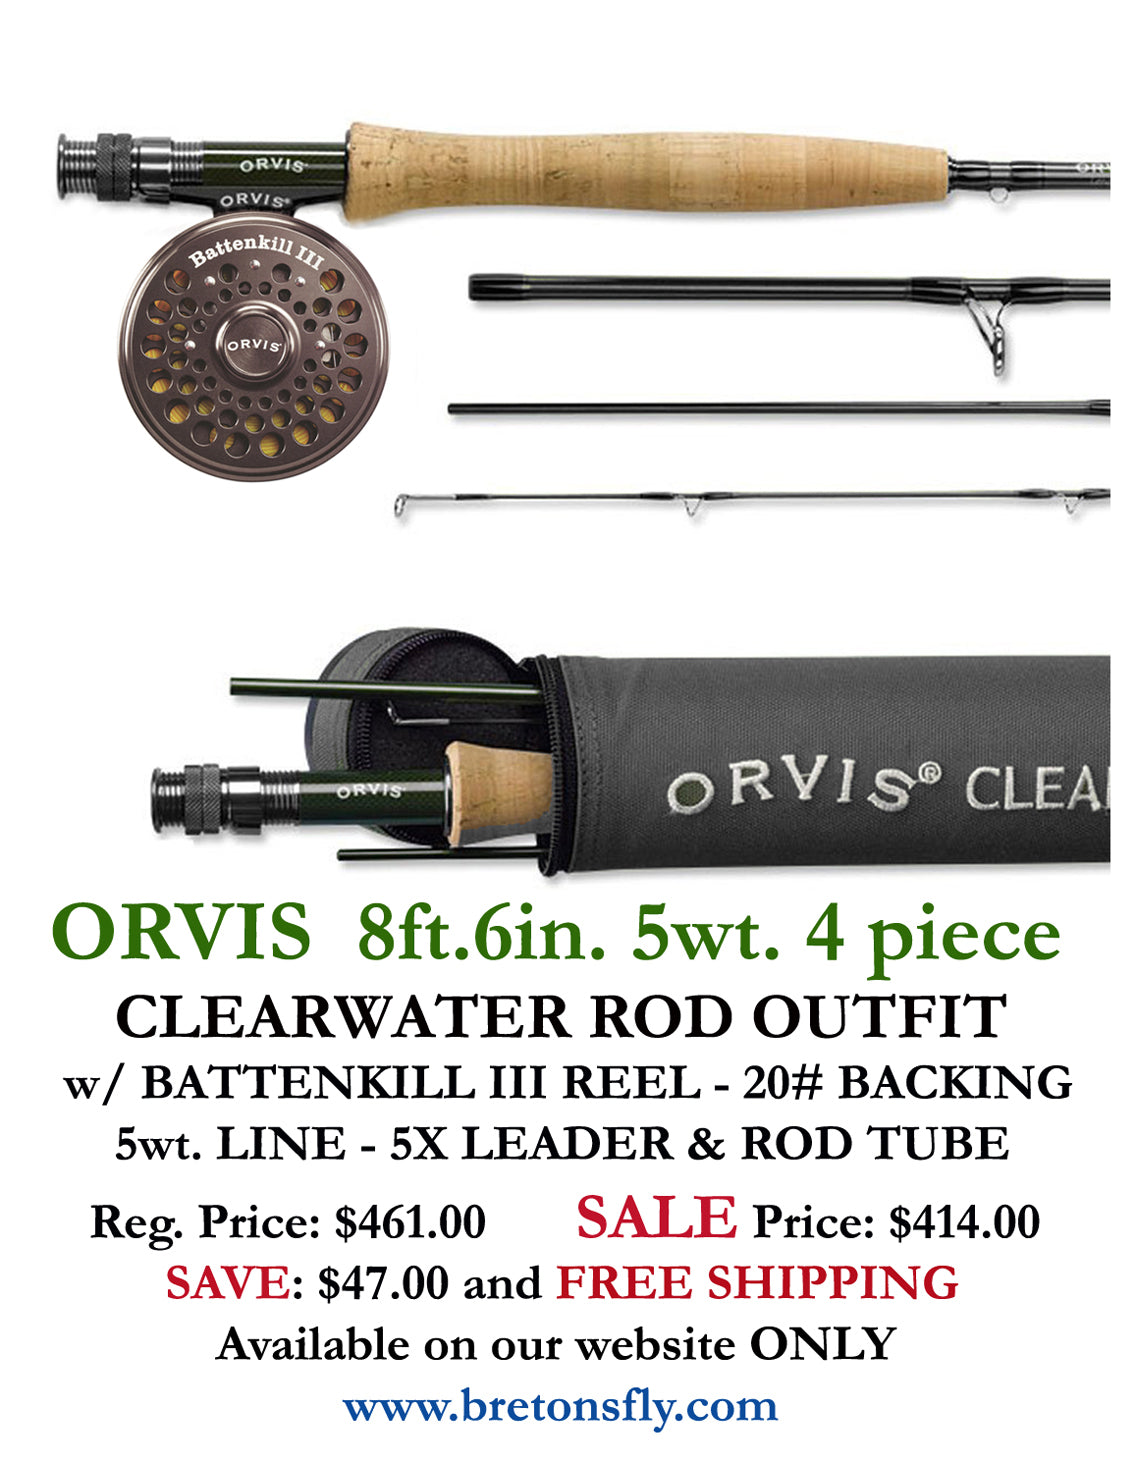 Orvis Clearwater 10' 3 weight Fly Rod Outfit